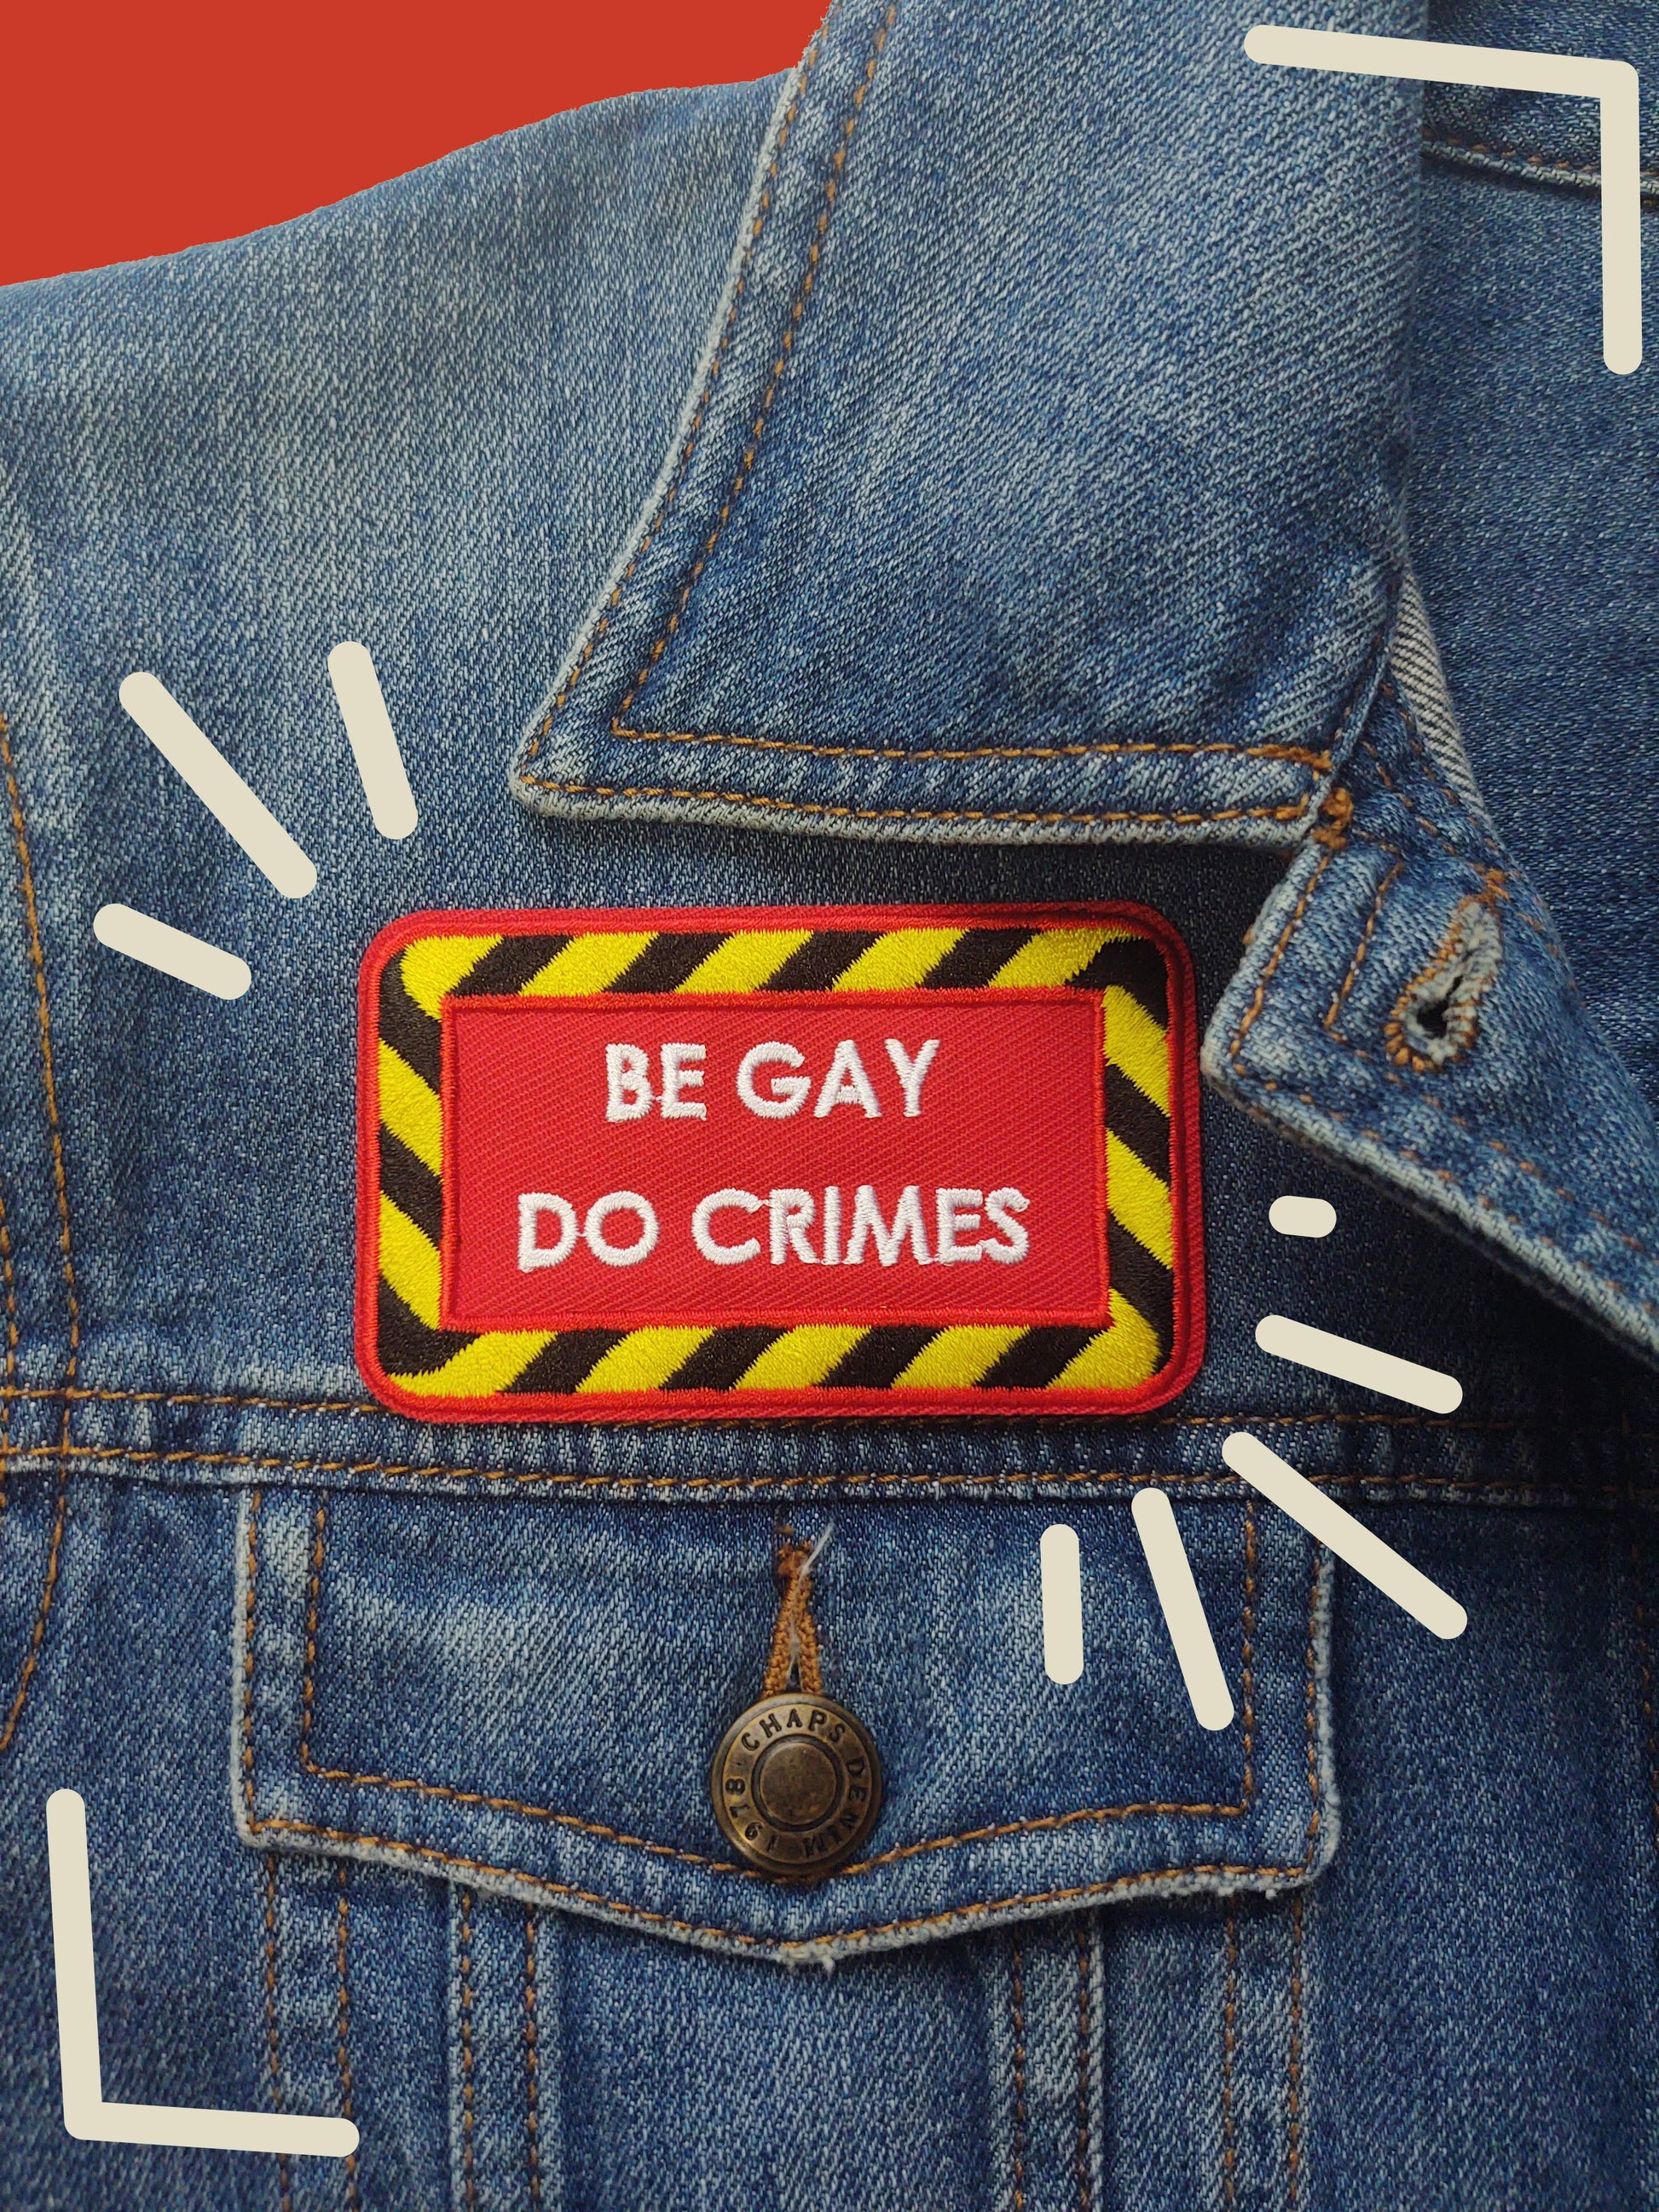 red iron-on patch with a black and yellow striped border and white text "be gay do crimes". It's sitting on the chest of a denim jacket